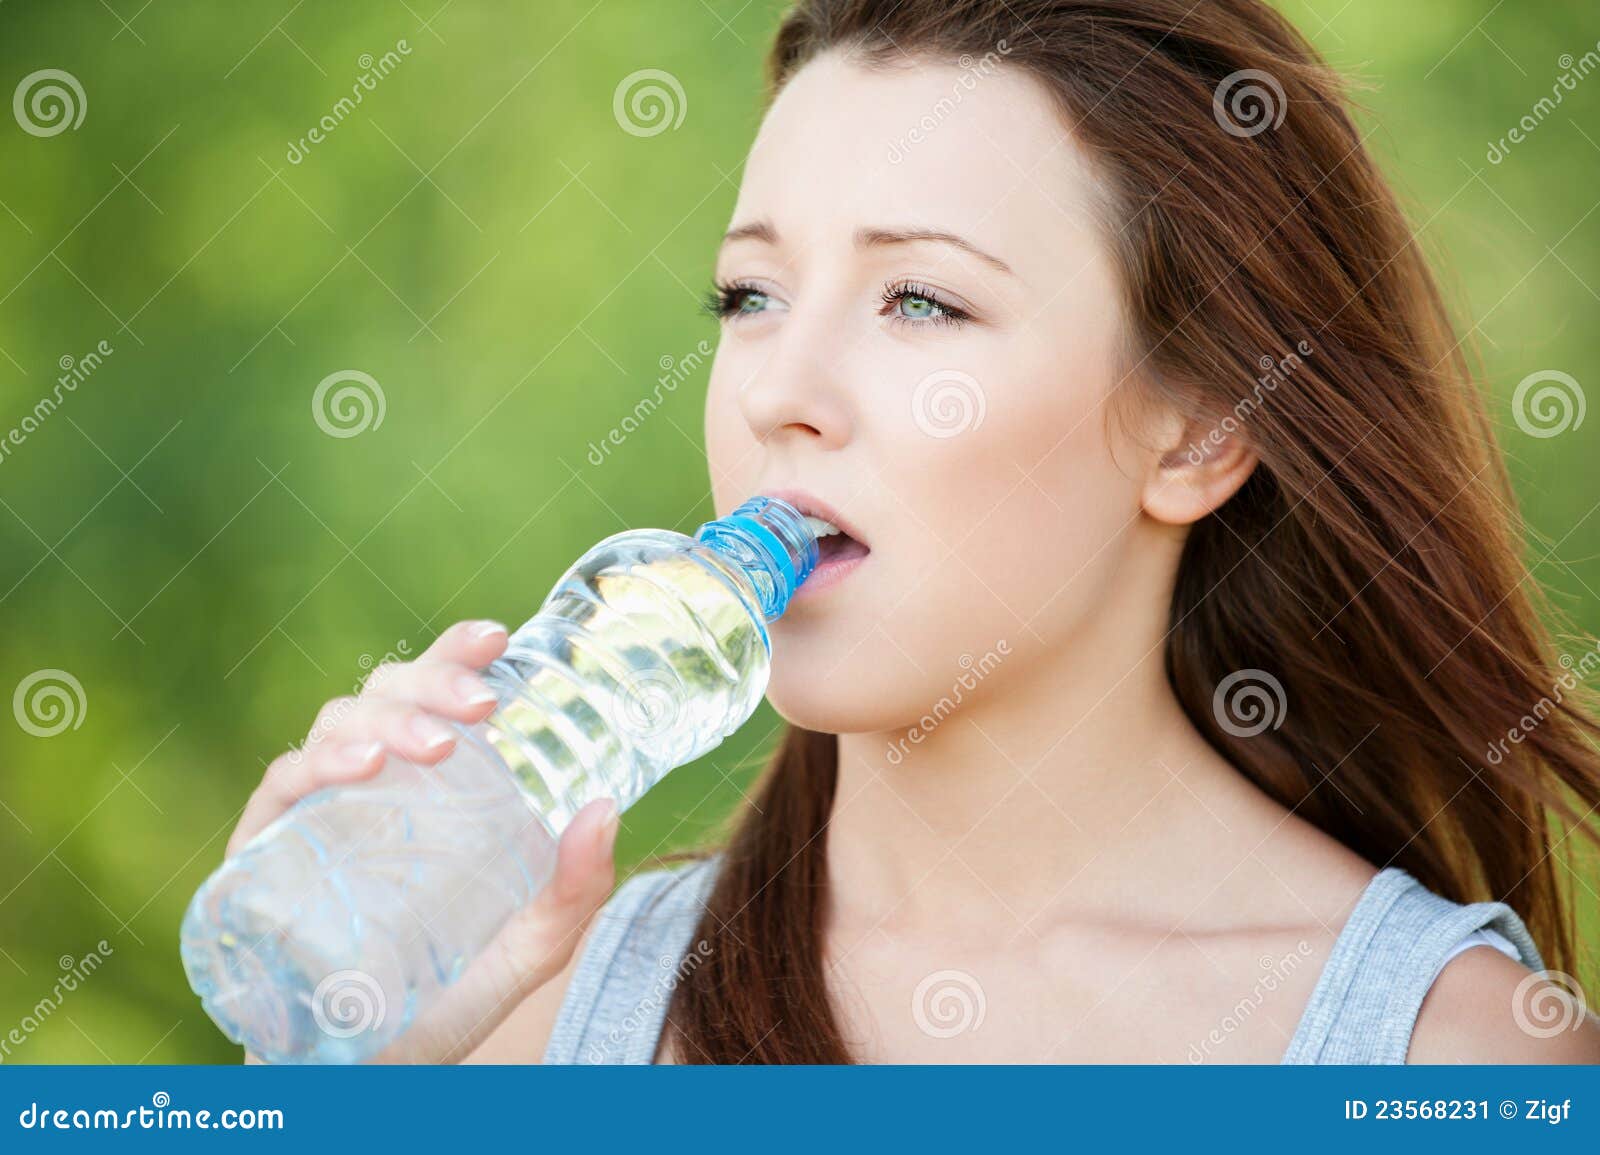 Young skinny girl drinking clean water from bottle in 